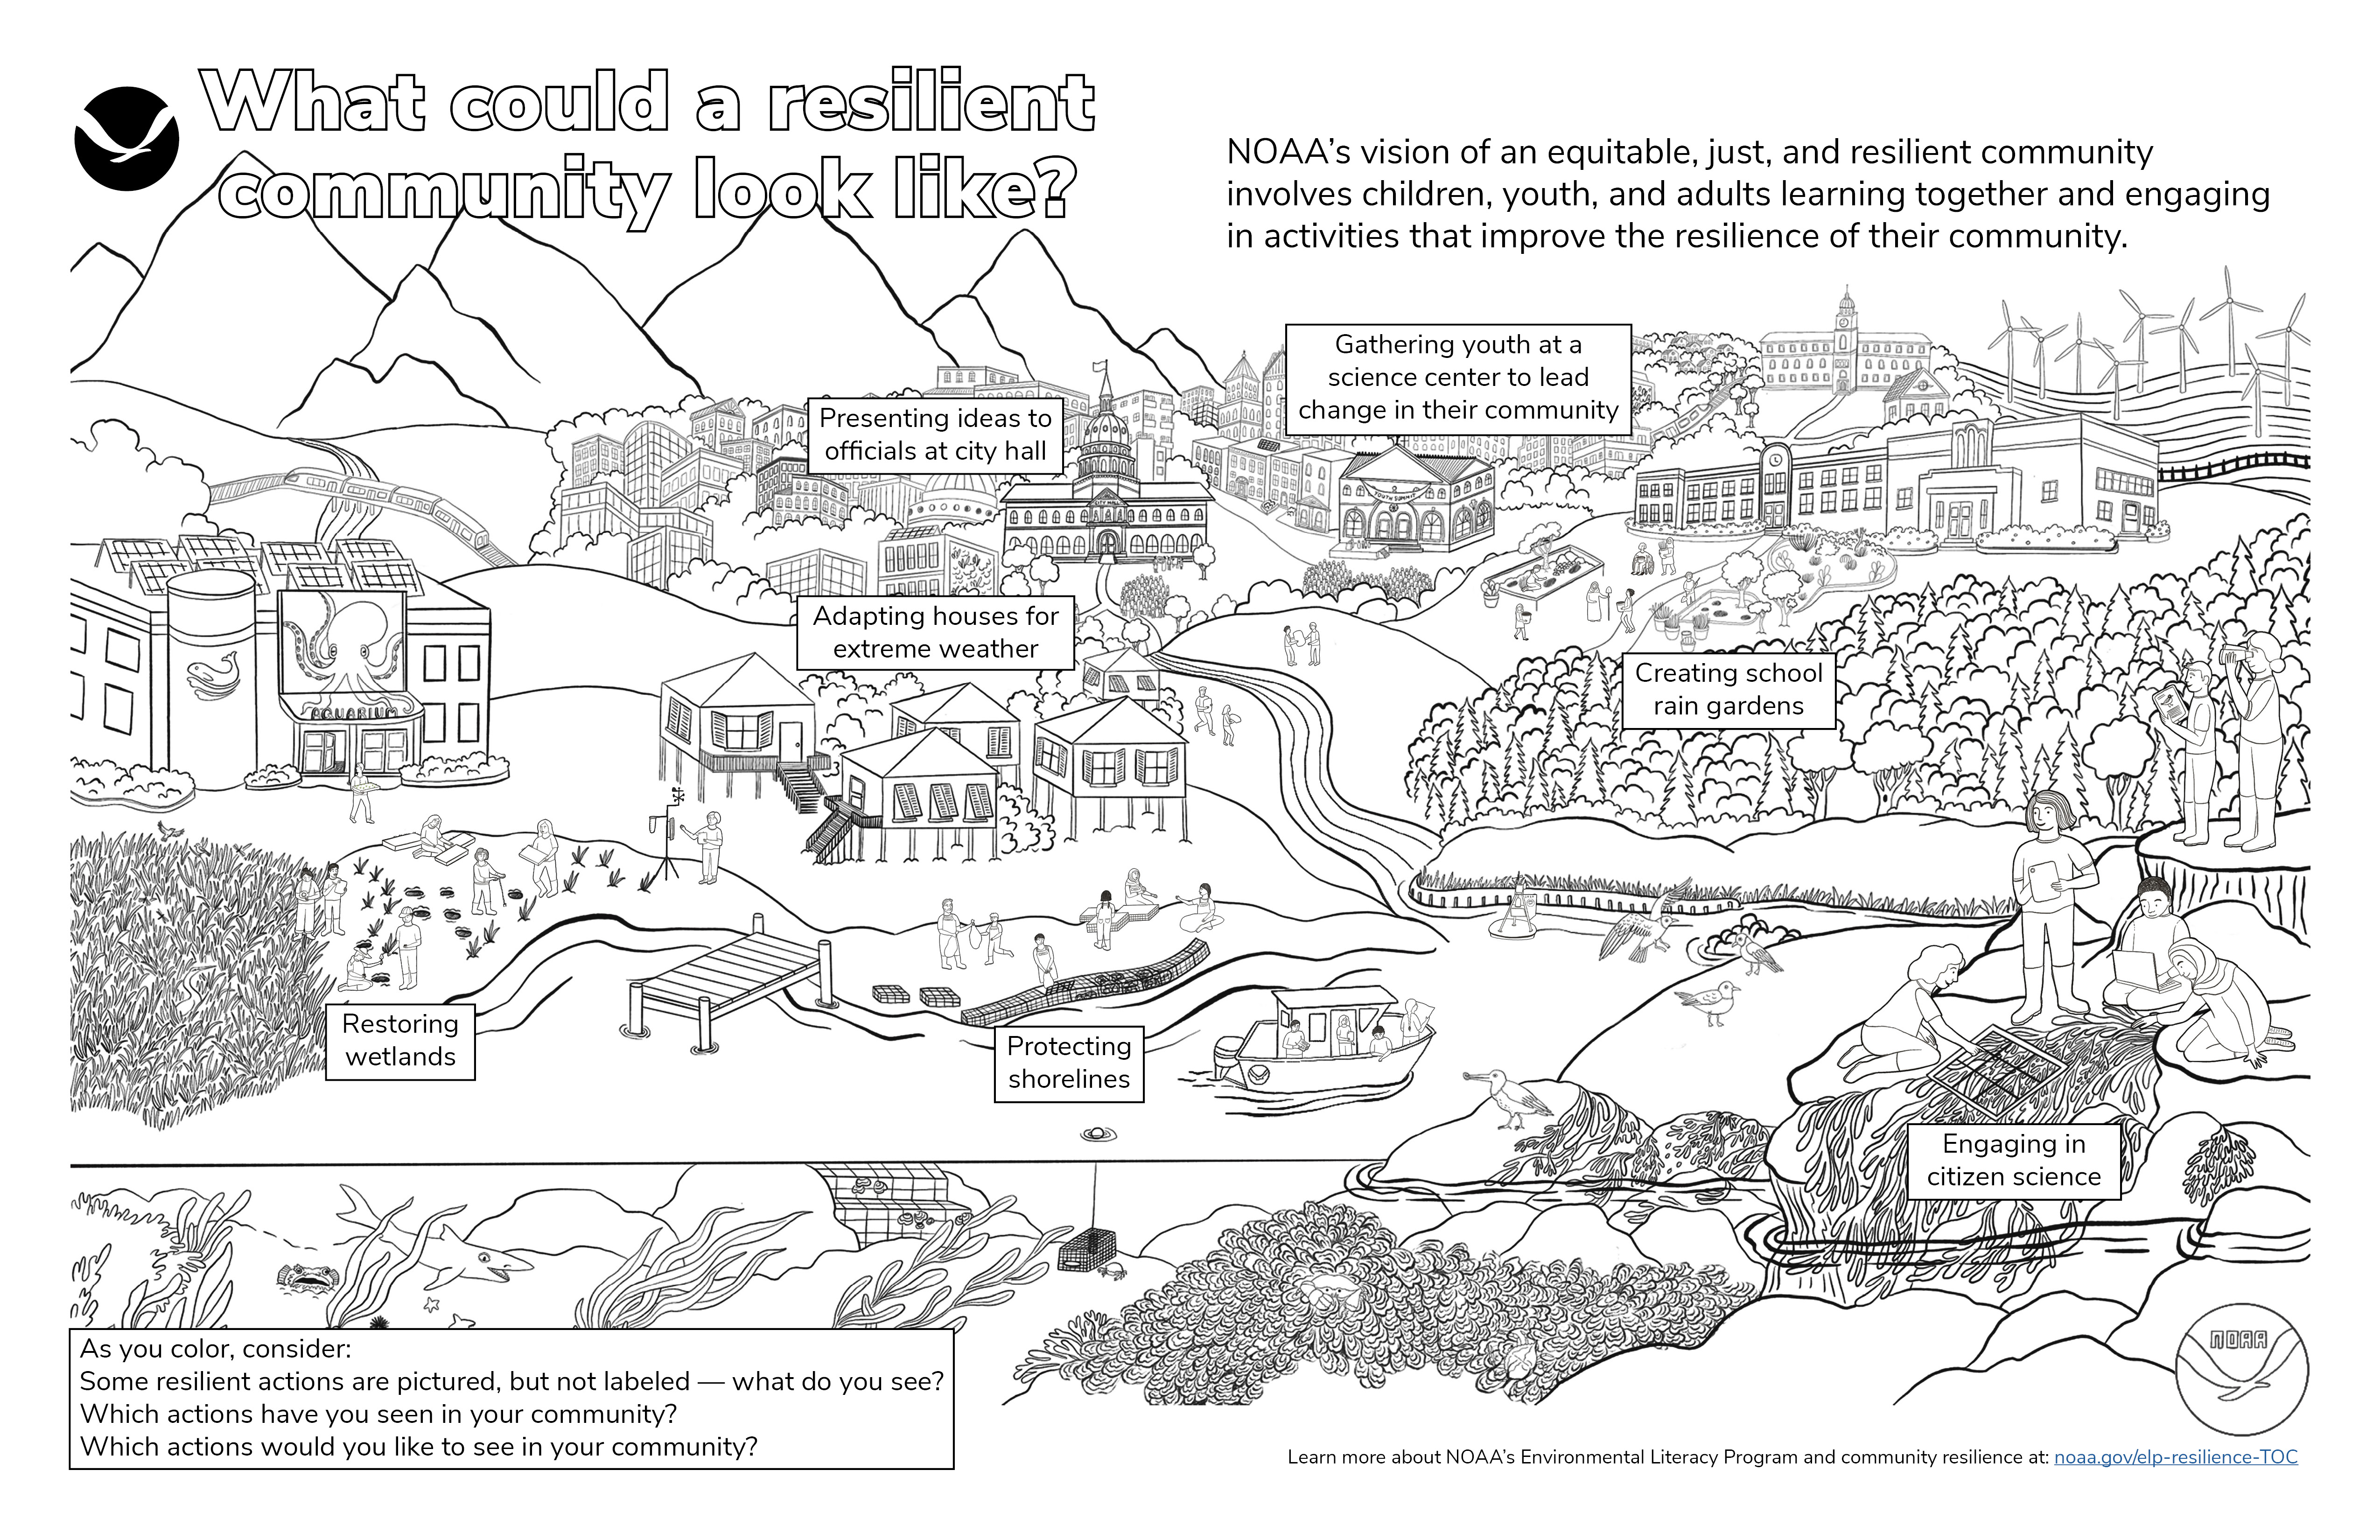 Get creative with our coloring page on community resilience national oceanic and atmospheric administration